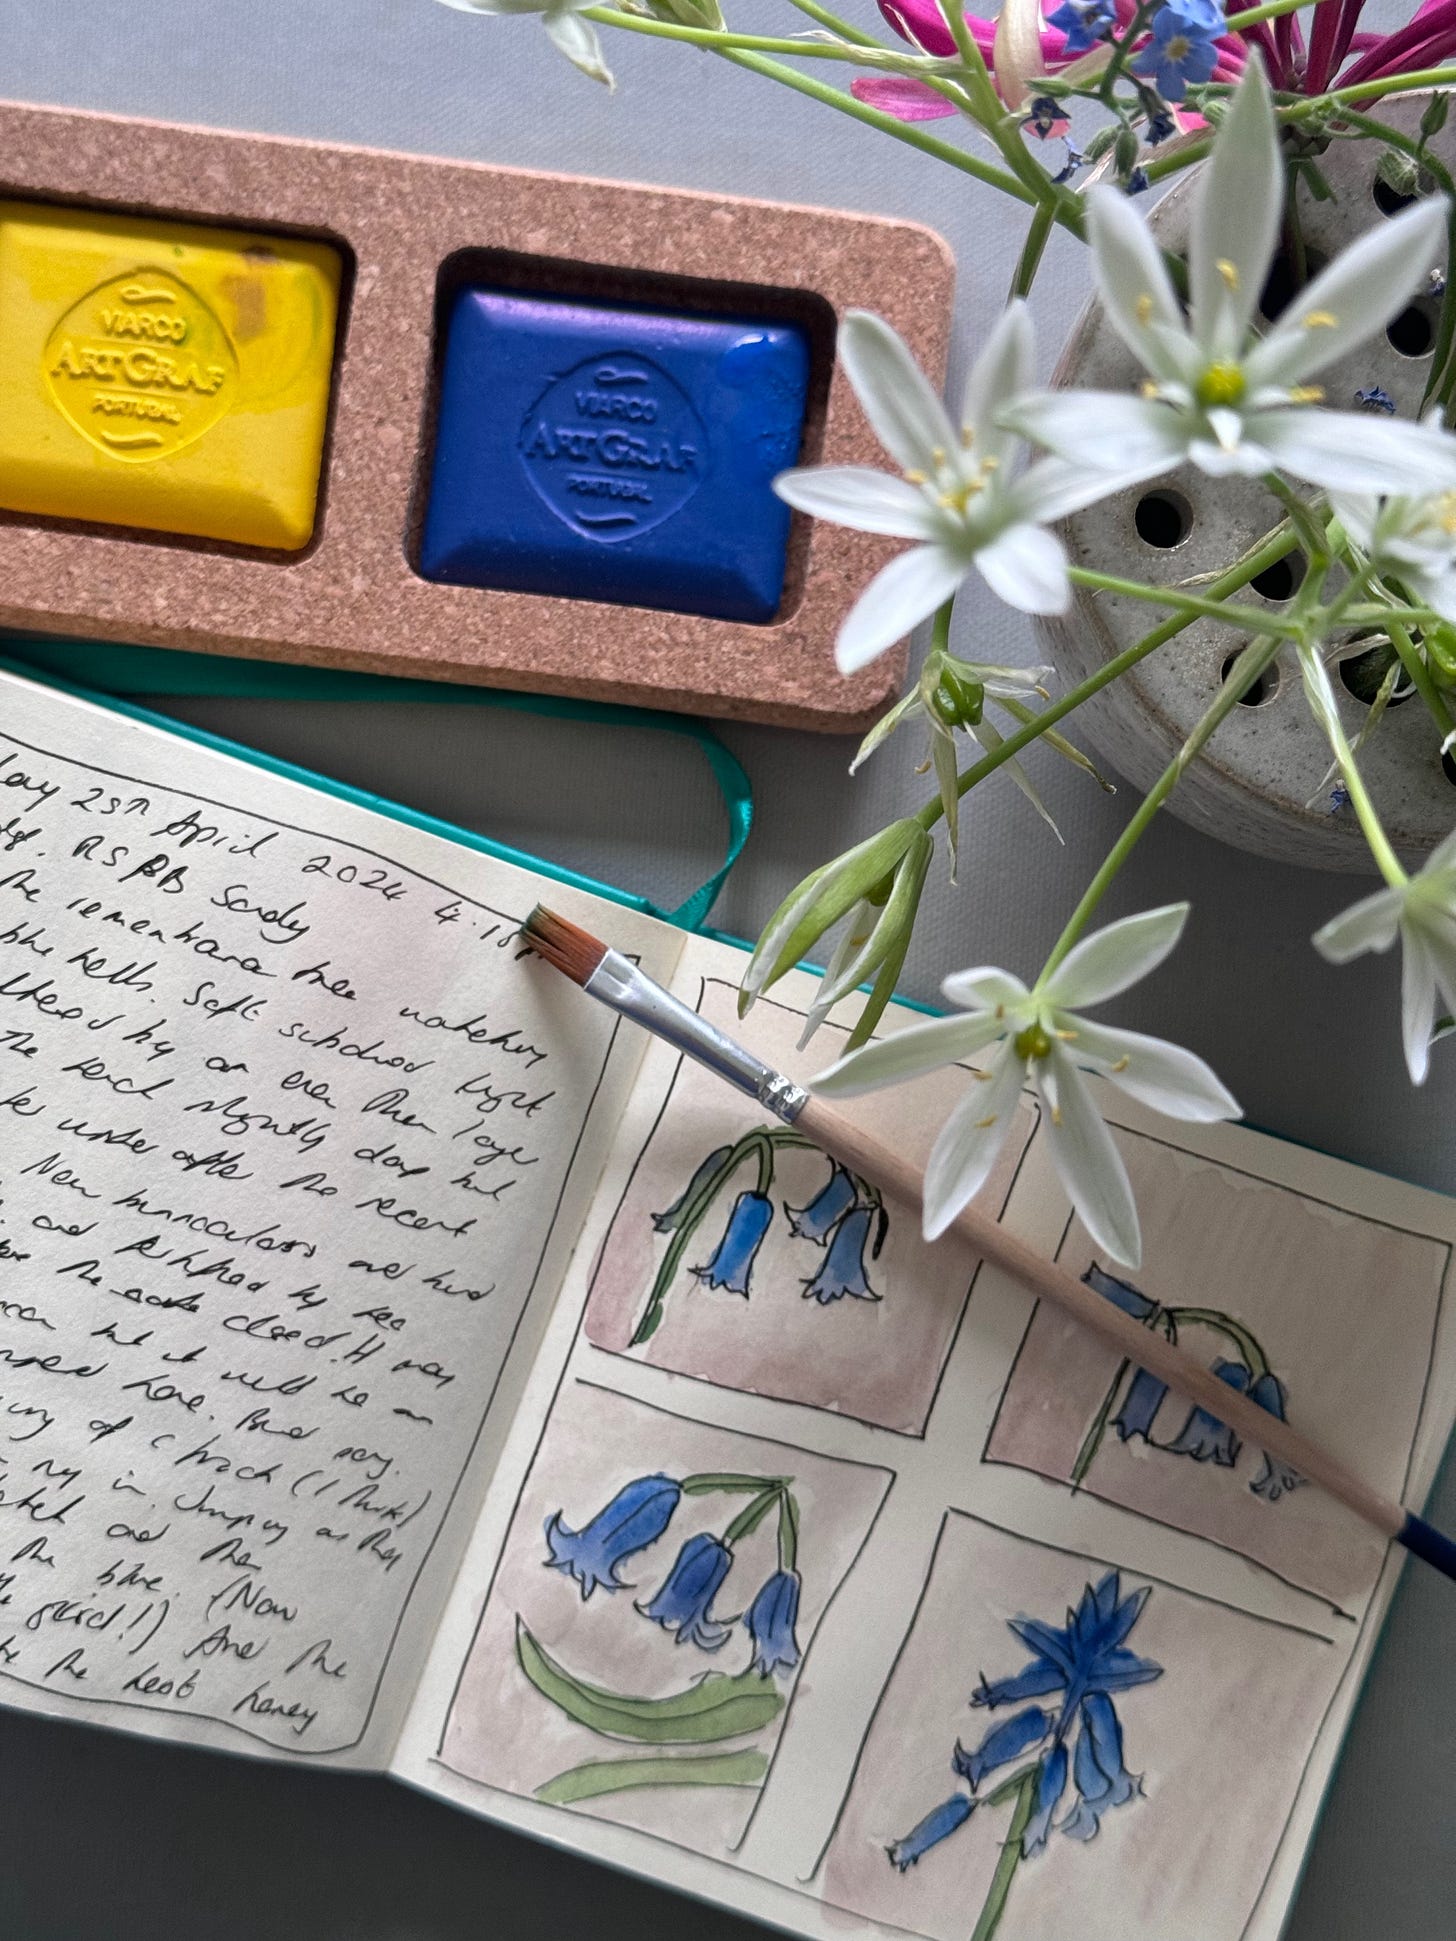 Small square sketchbook on a table. Left hand side shows writing which is transcribed in the text above. Right hand has a paint brush laying across the page. The page has four pen sketches of bluebells which have been painted. Also on the table are yellow and blue paint pigments and a vase of white Star of Bethlehem flowers.